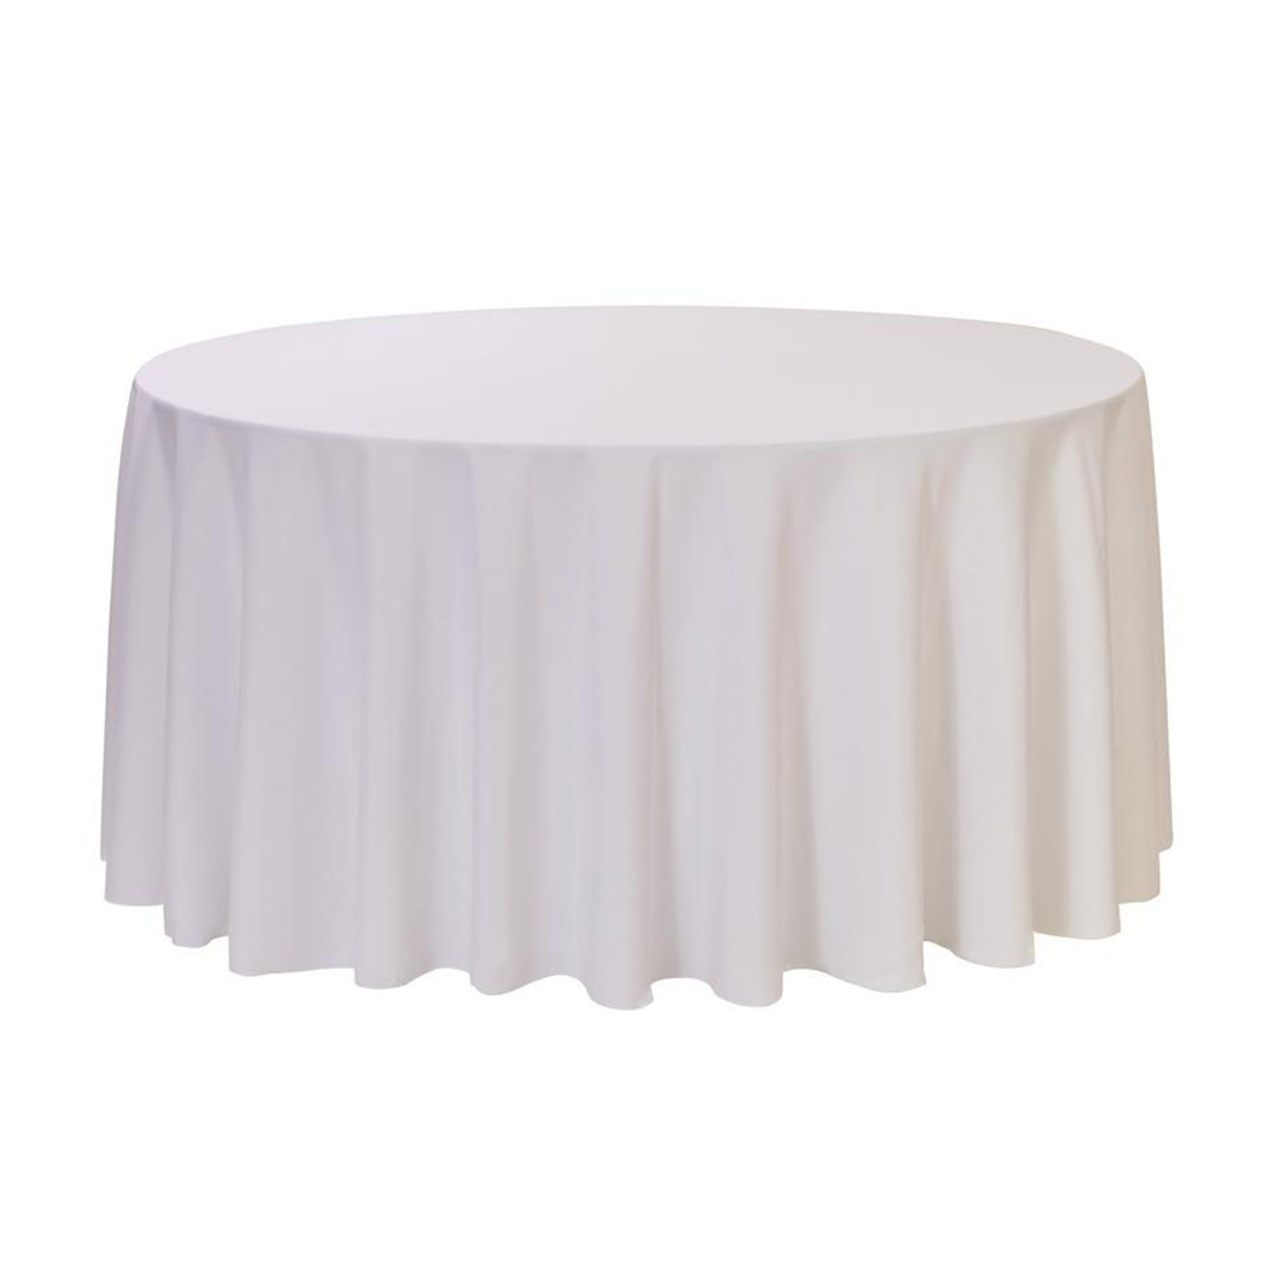 ROUND TABLE WITH TABLECLOTH